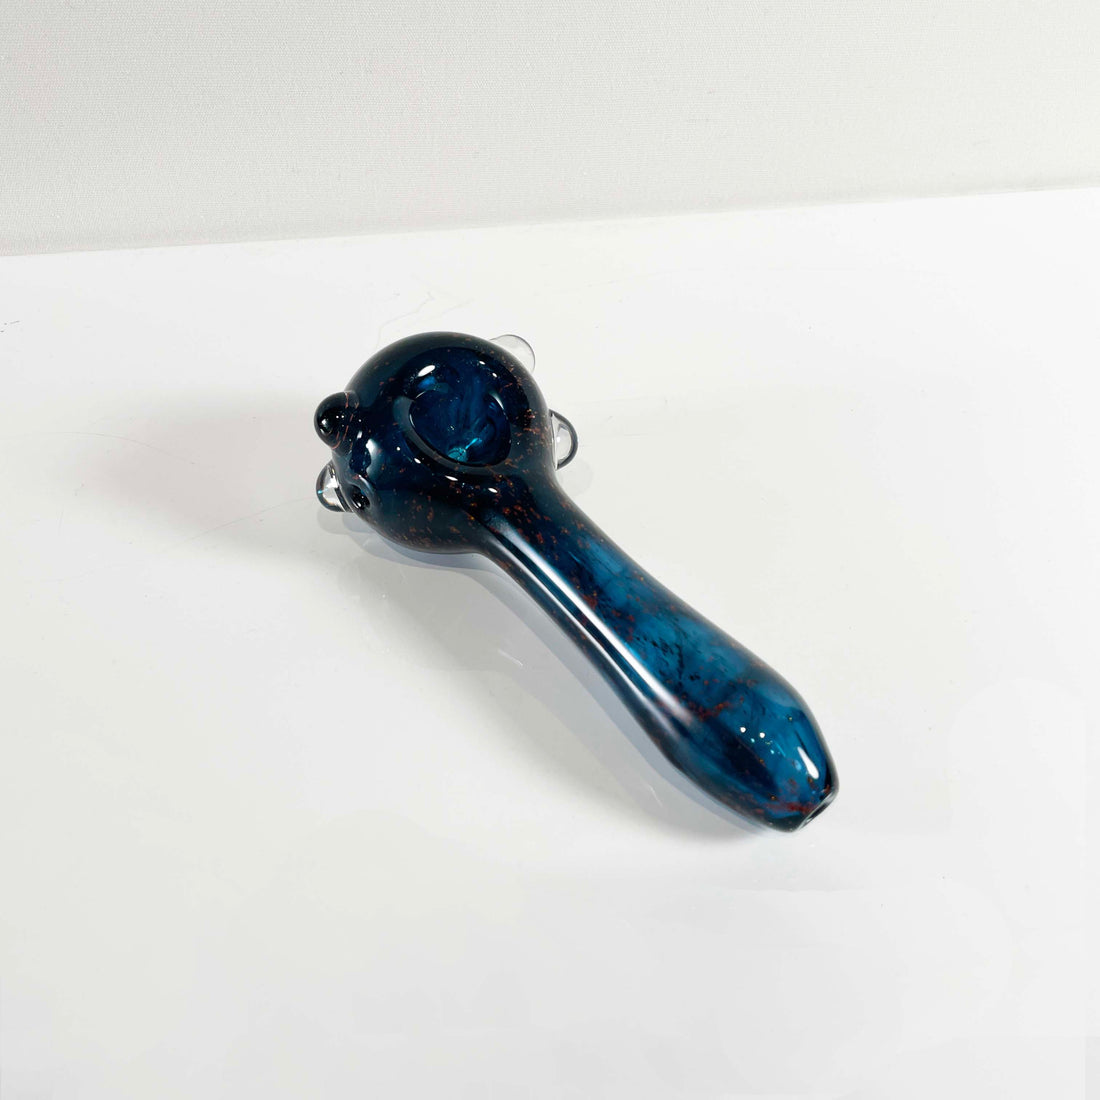 empire glassworks marine spoon pipe bliss shop chicago